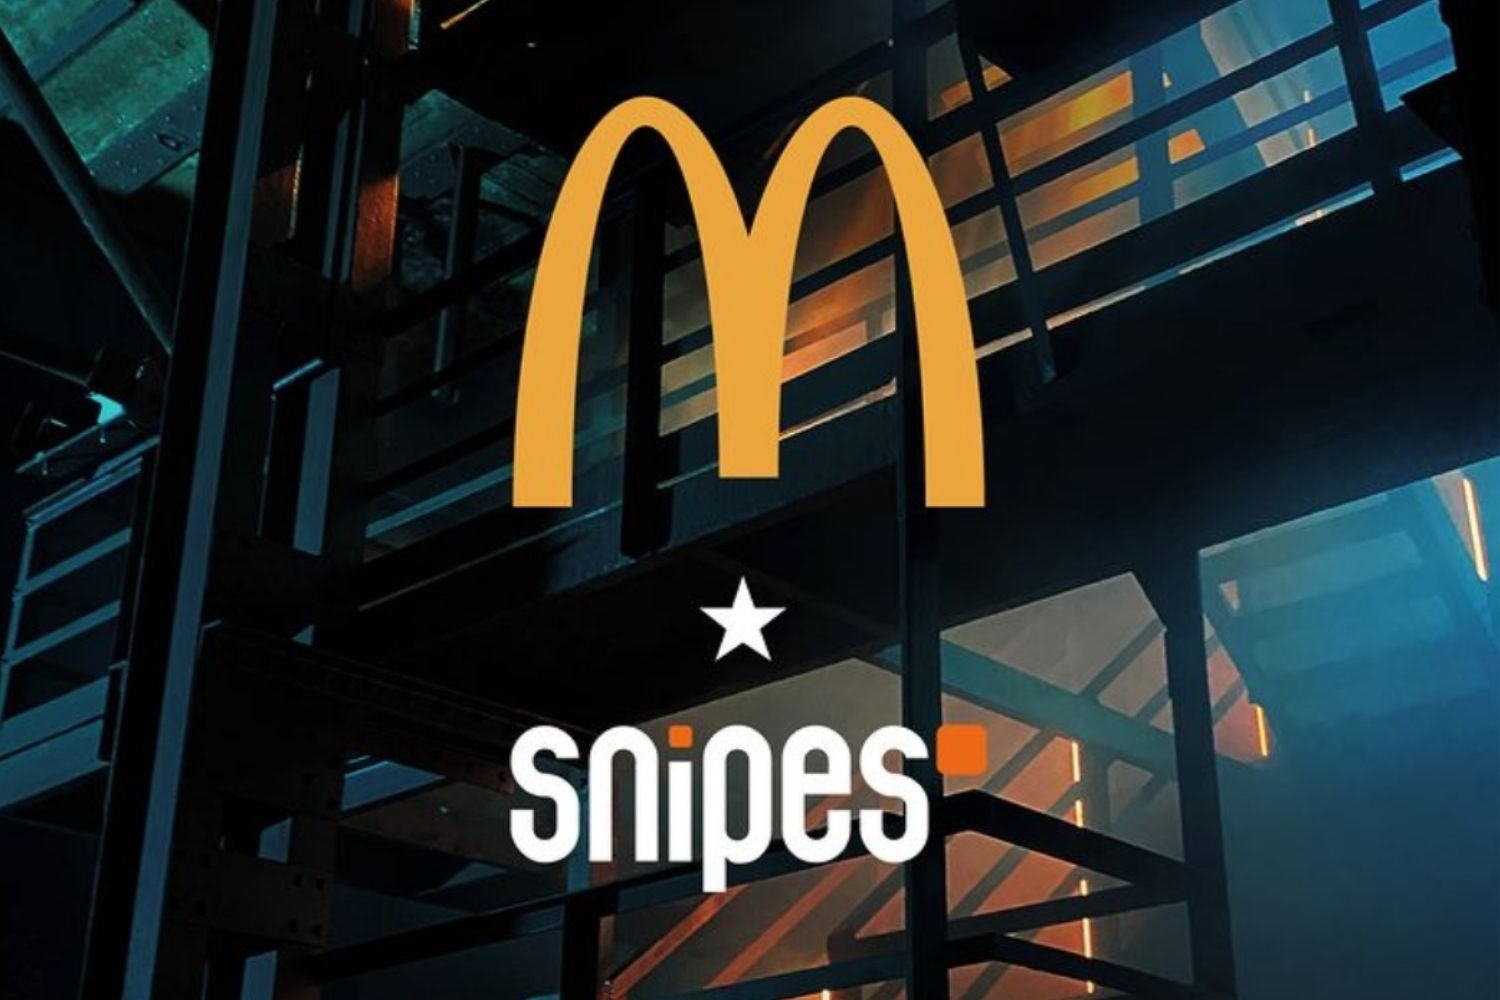 The new Snipes x McDonalds collection is on its way